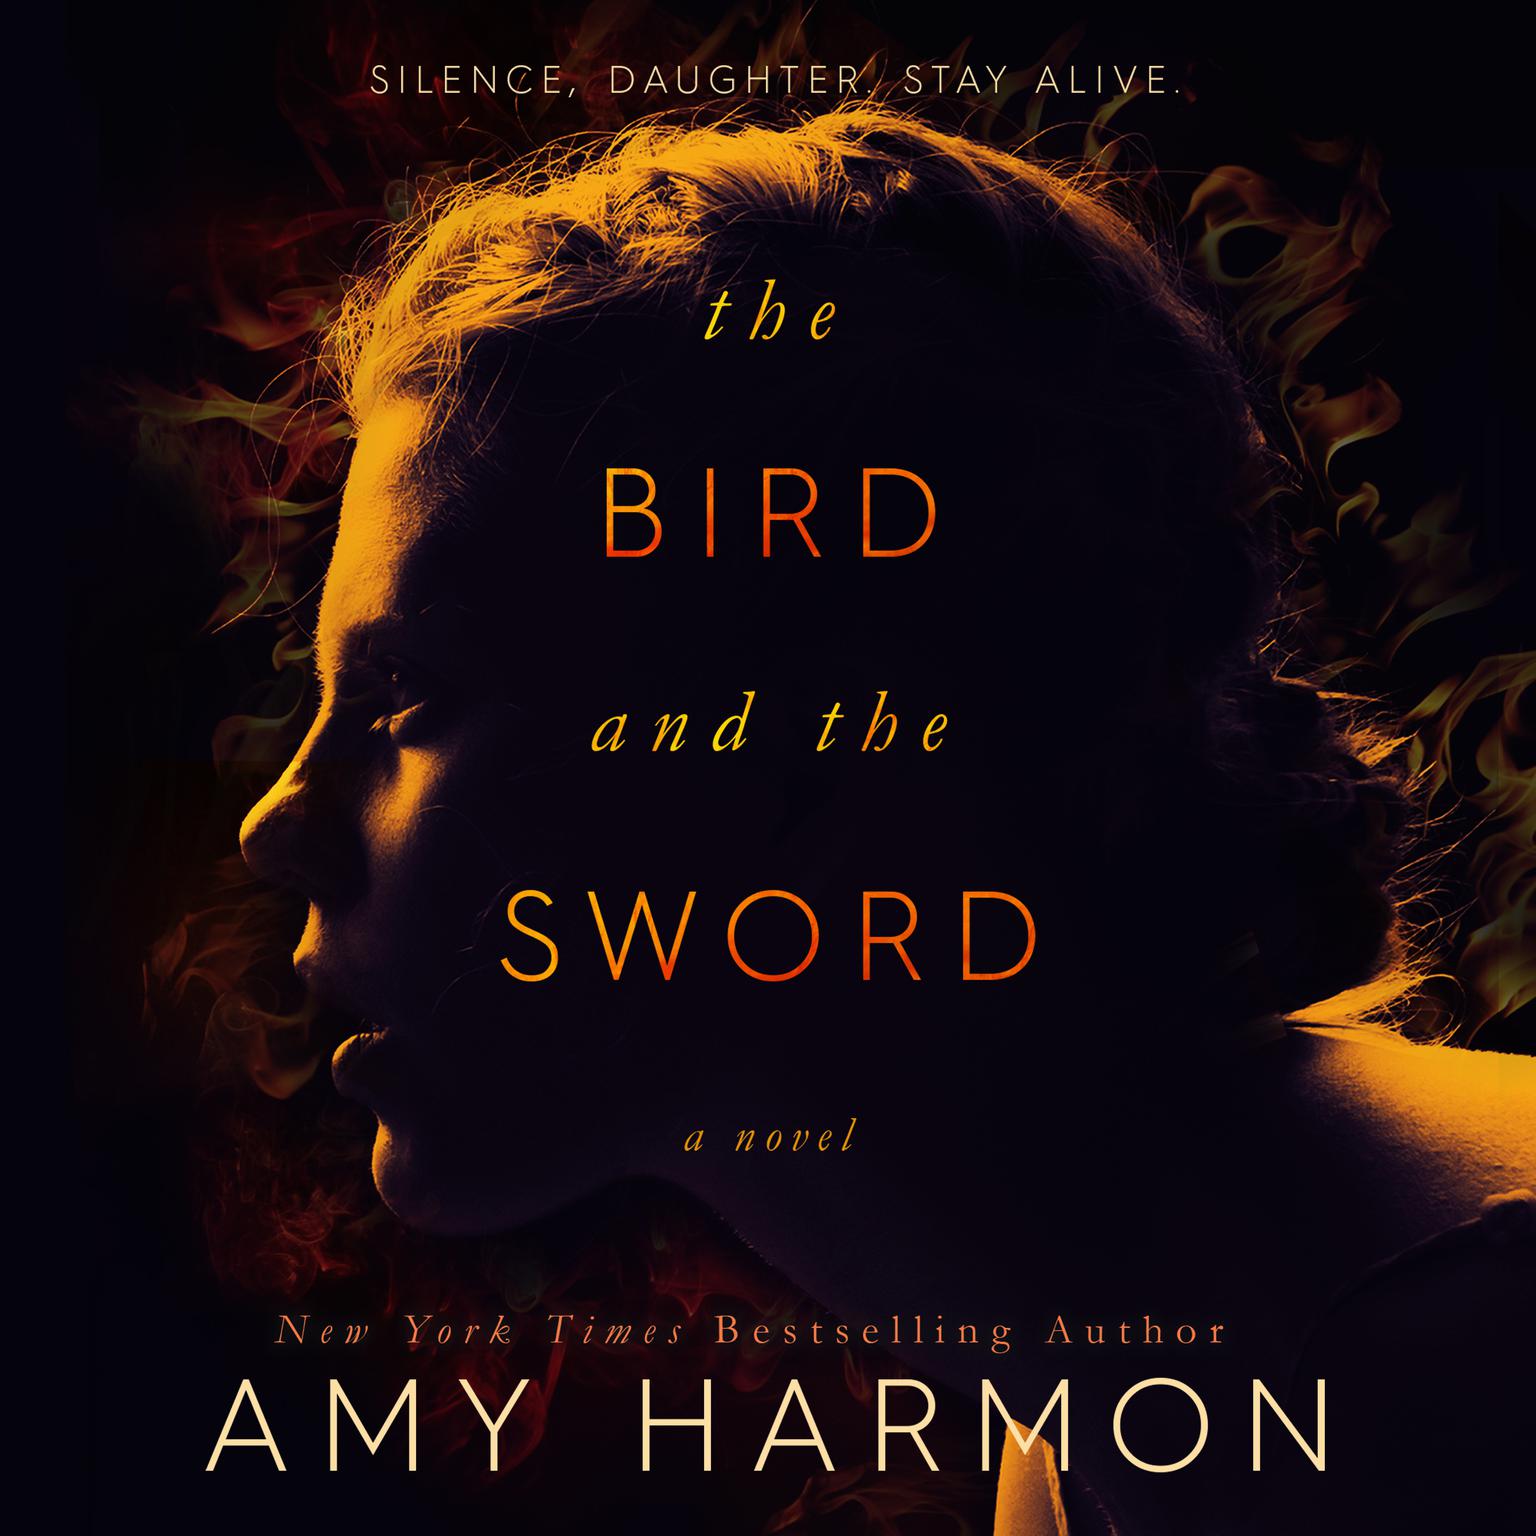 The Bird and the Sword Audiobook, by Amy Harmon